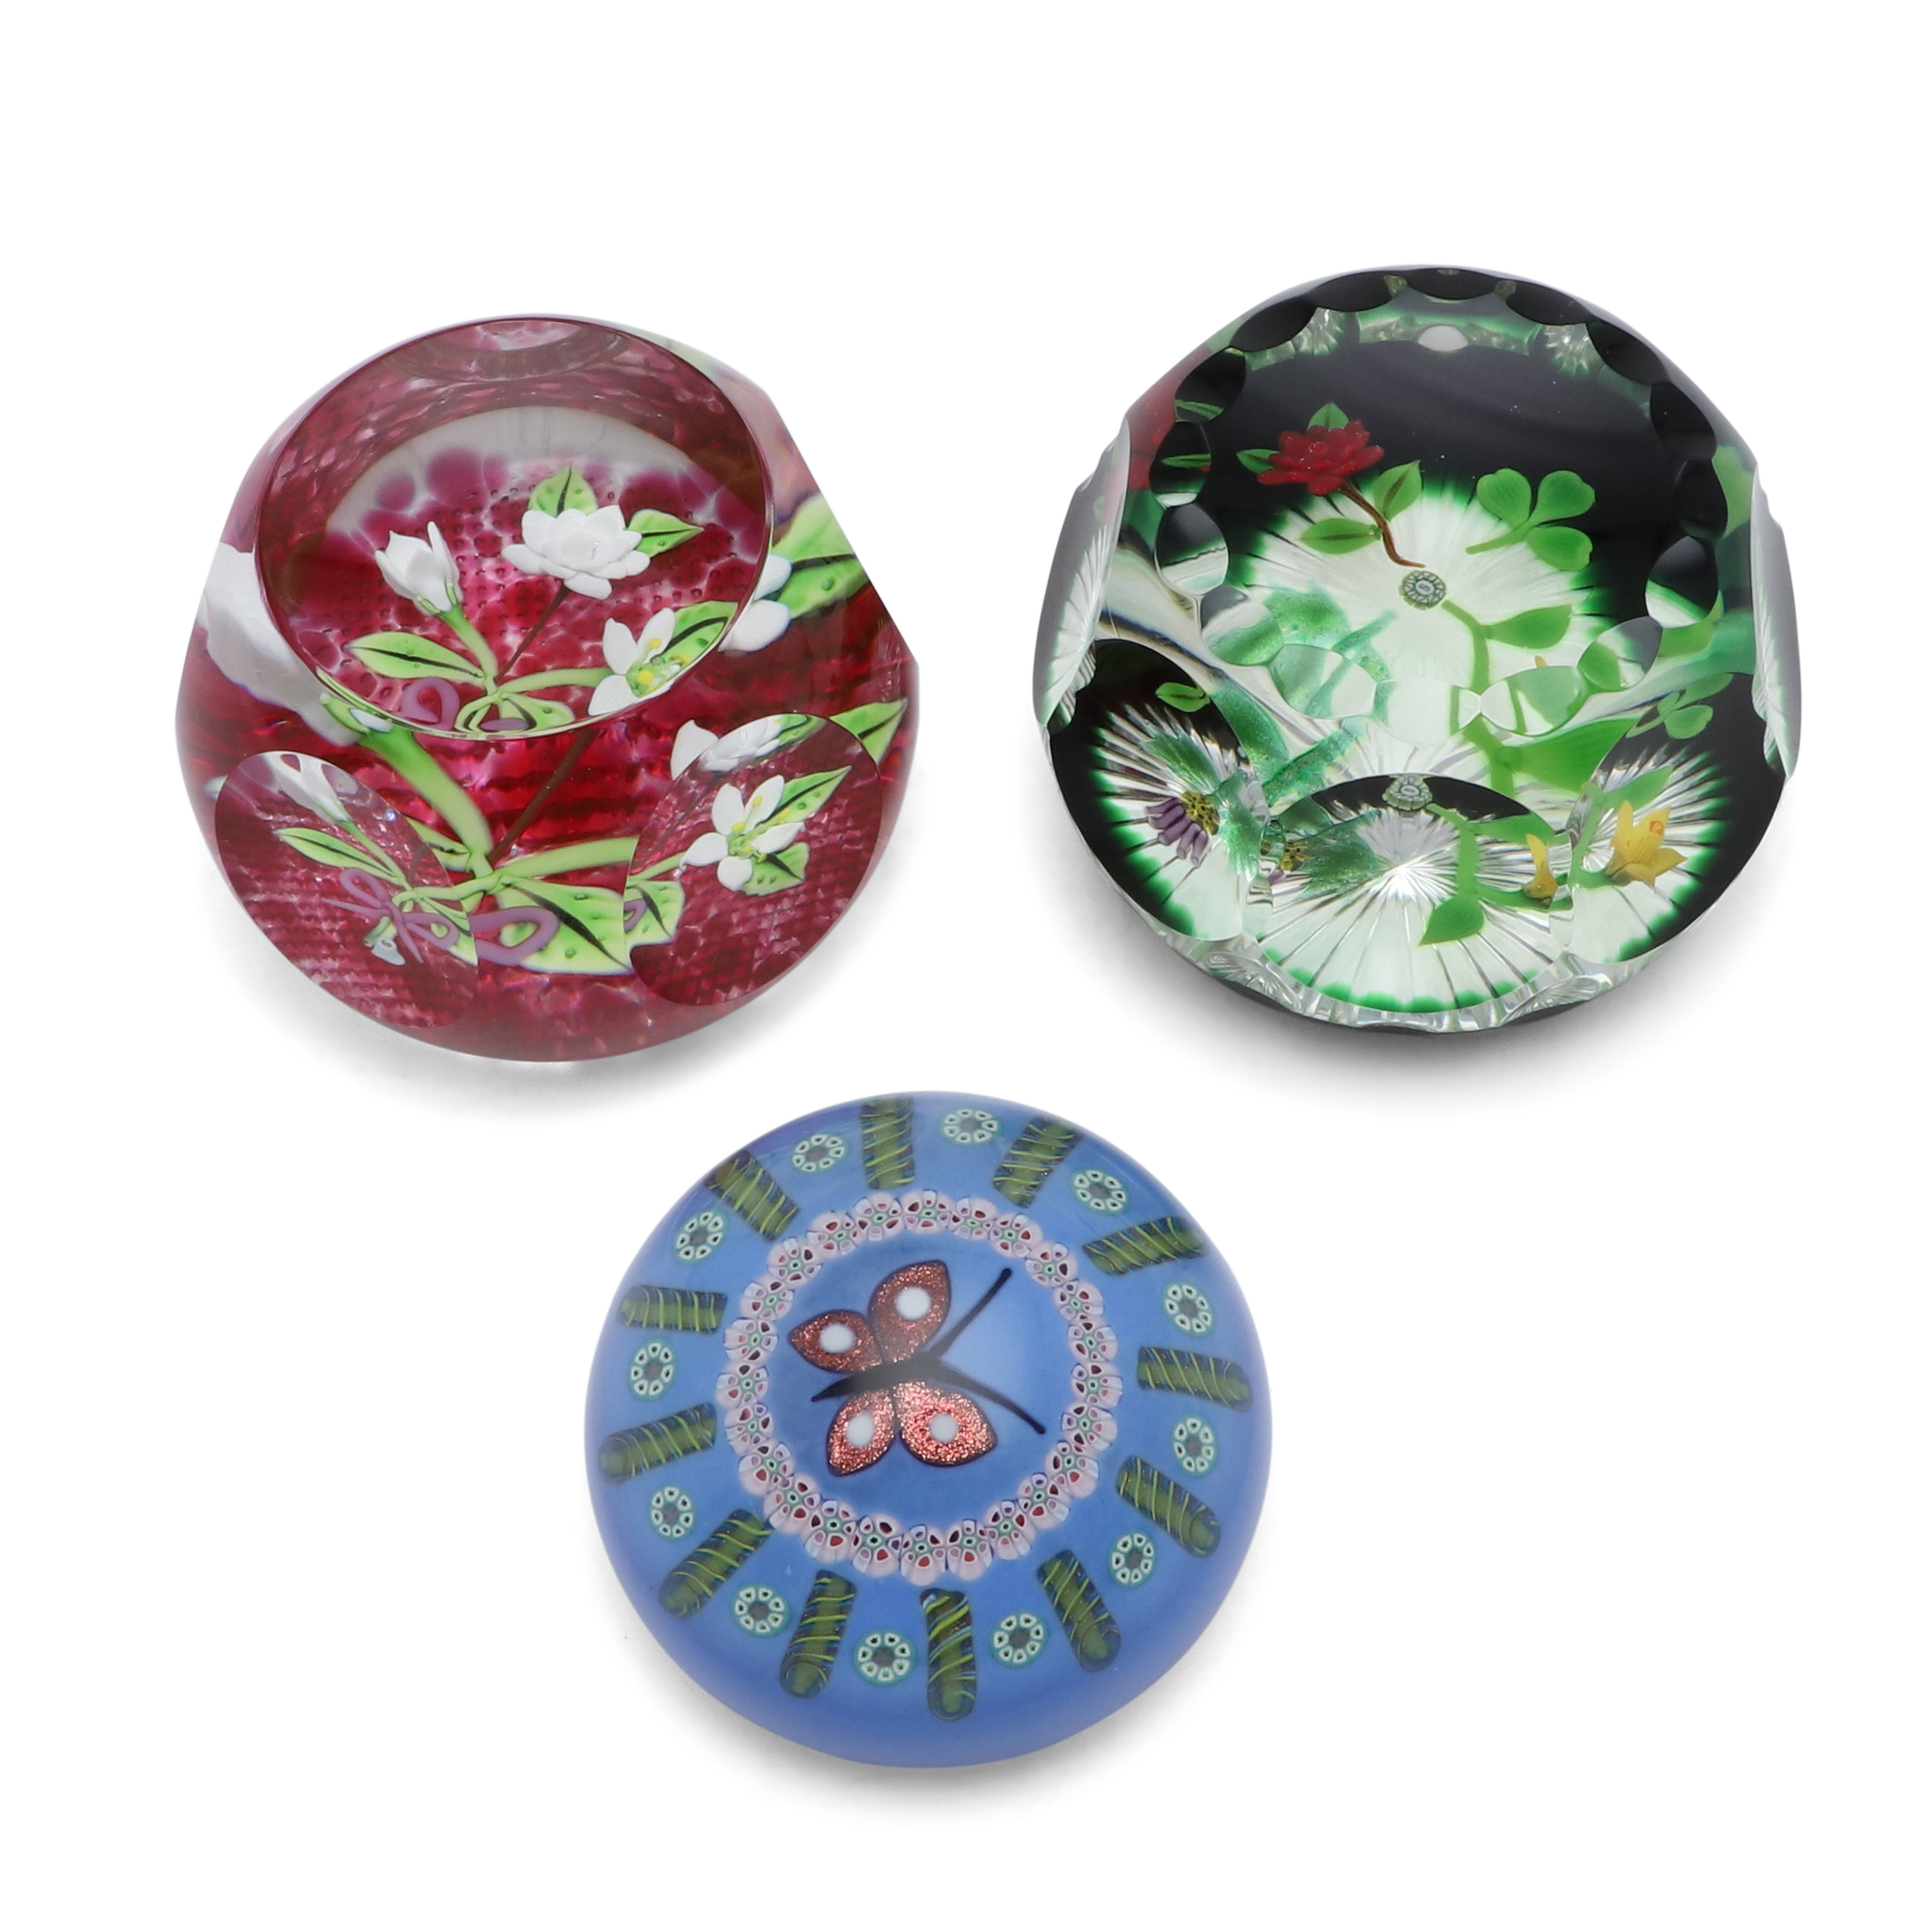 WILLIAM MANSON GLASS PAPERWEIGHTS - LIMITED EDITION.